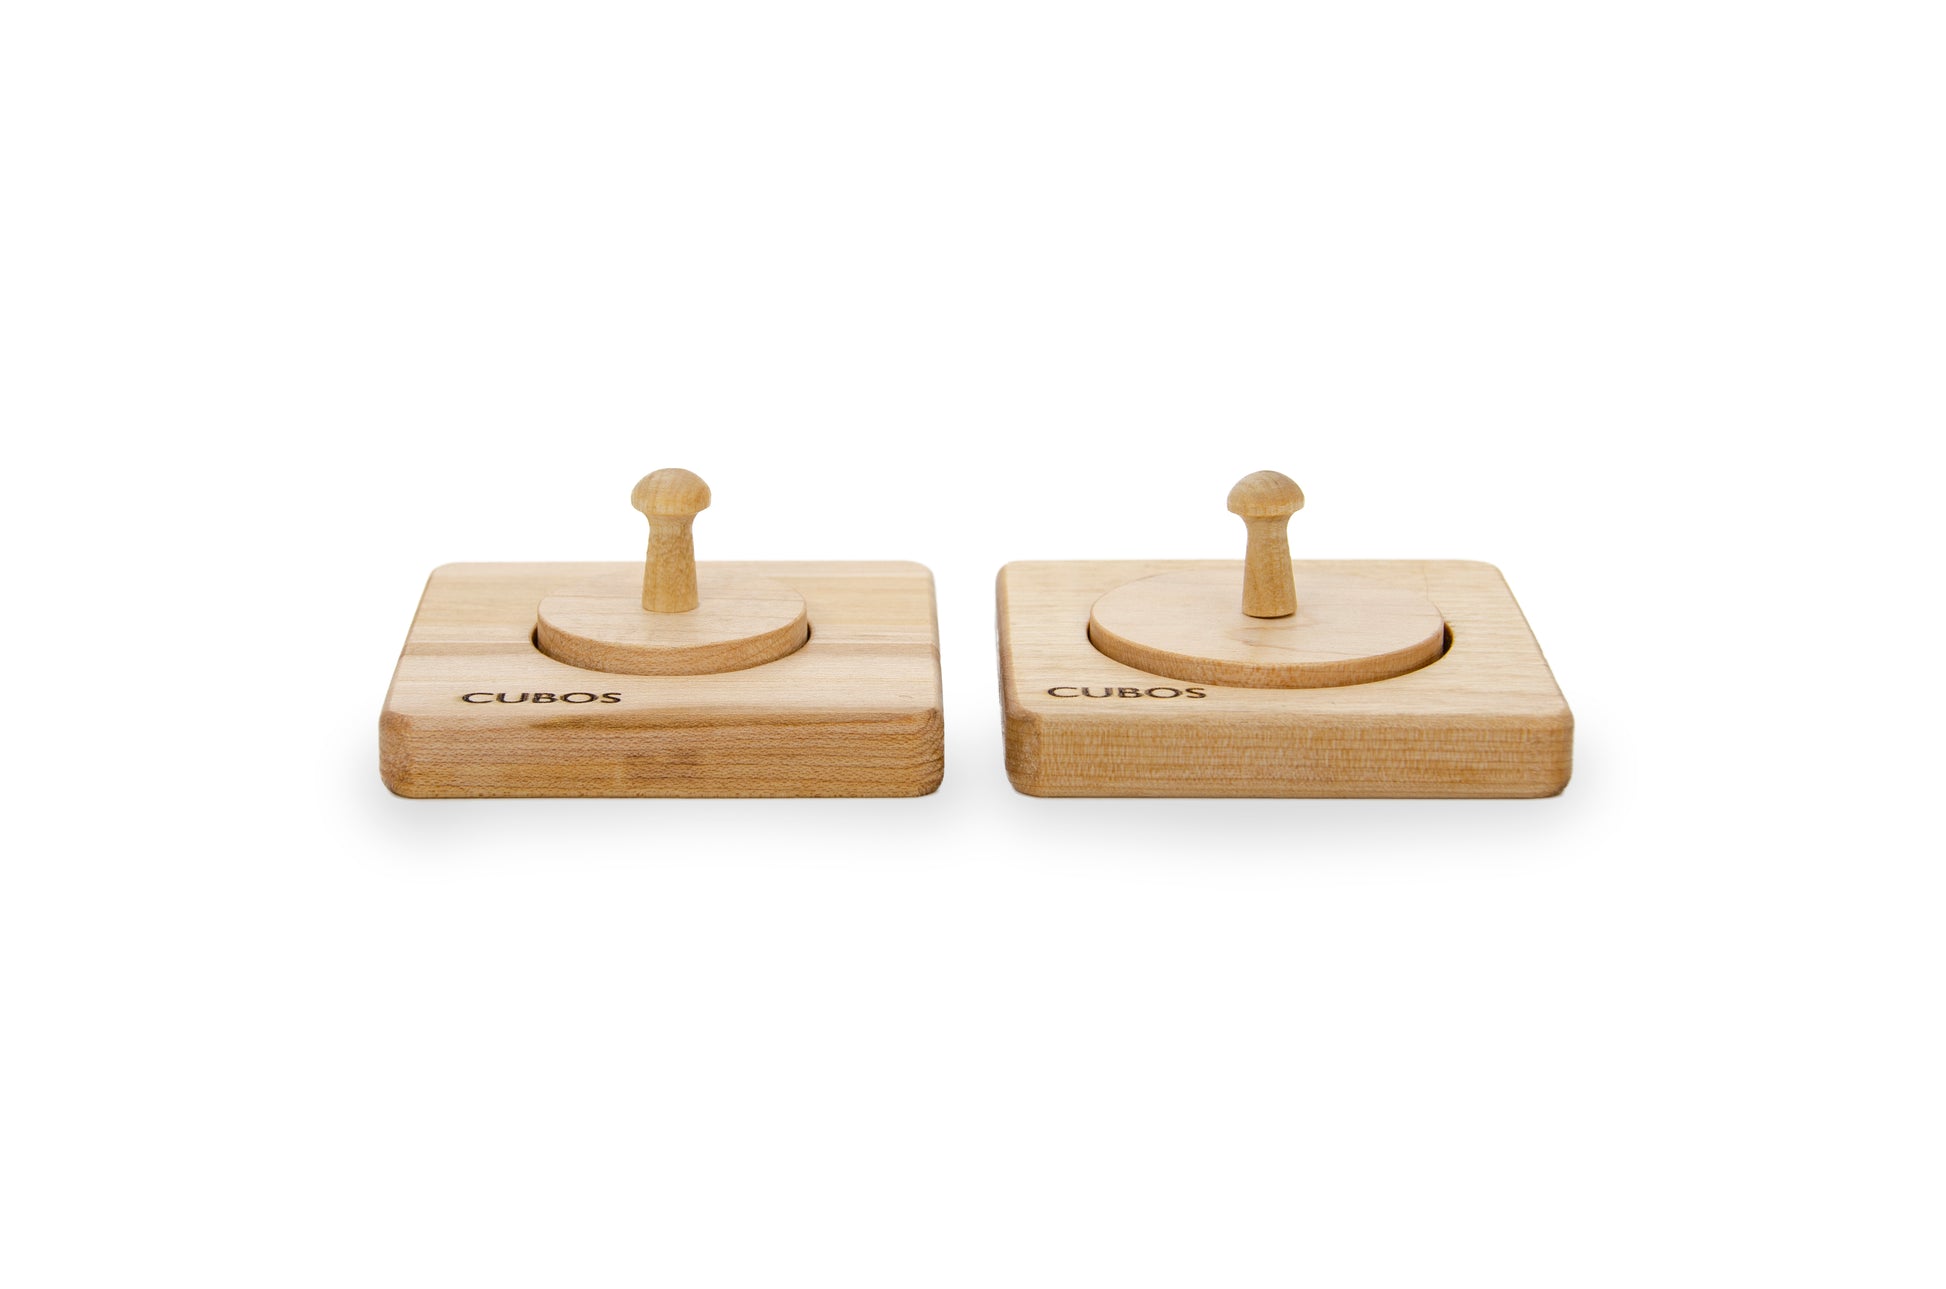 Circle puzzle closed - A wooden puzzle with two circular pieces of different sizes, promoting shape recognition and problem-solving skills in Montessori education